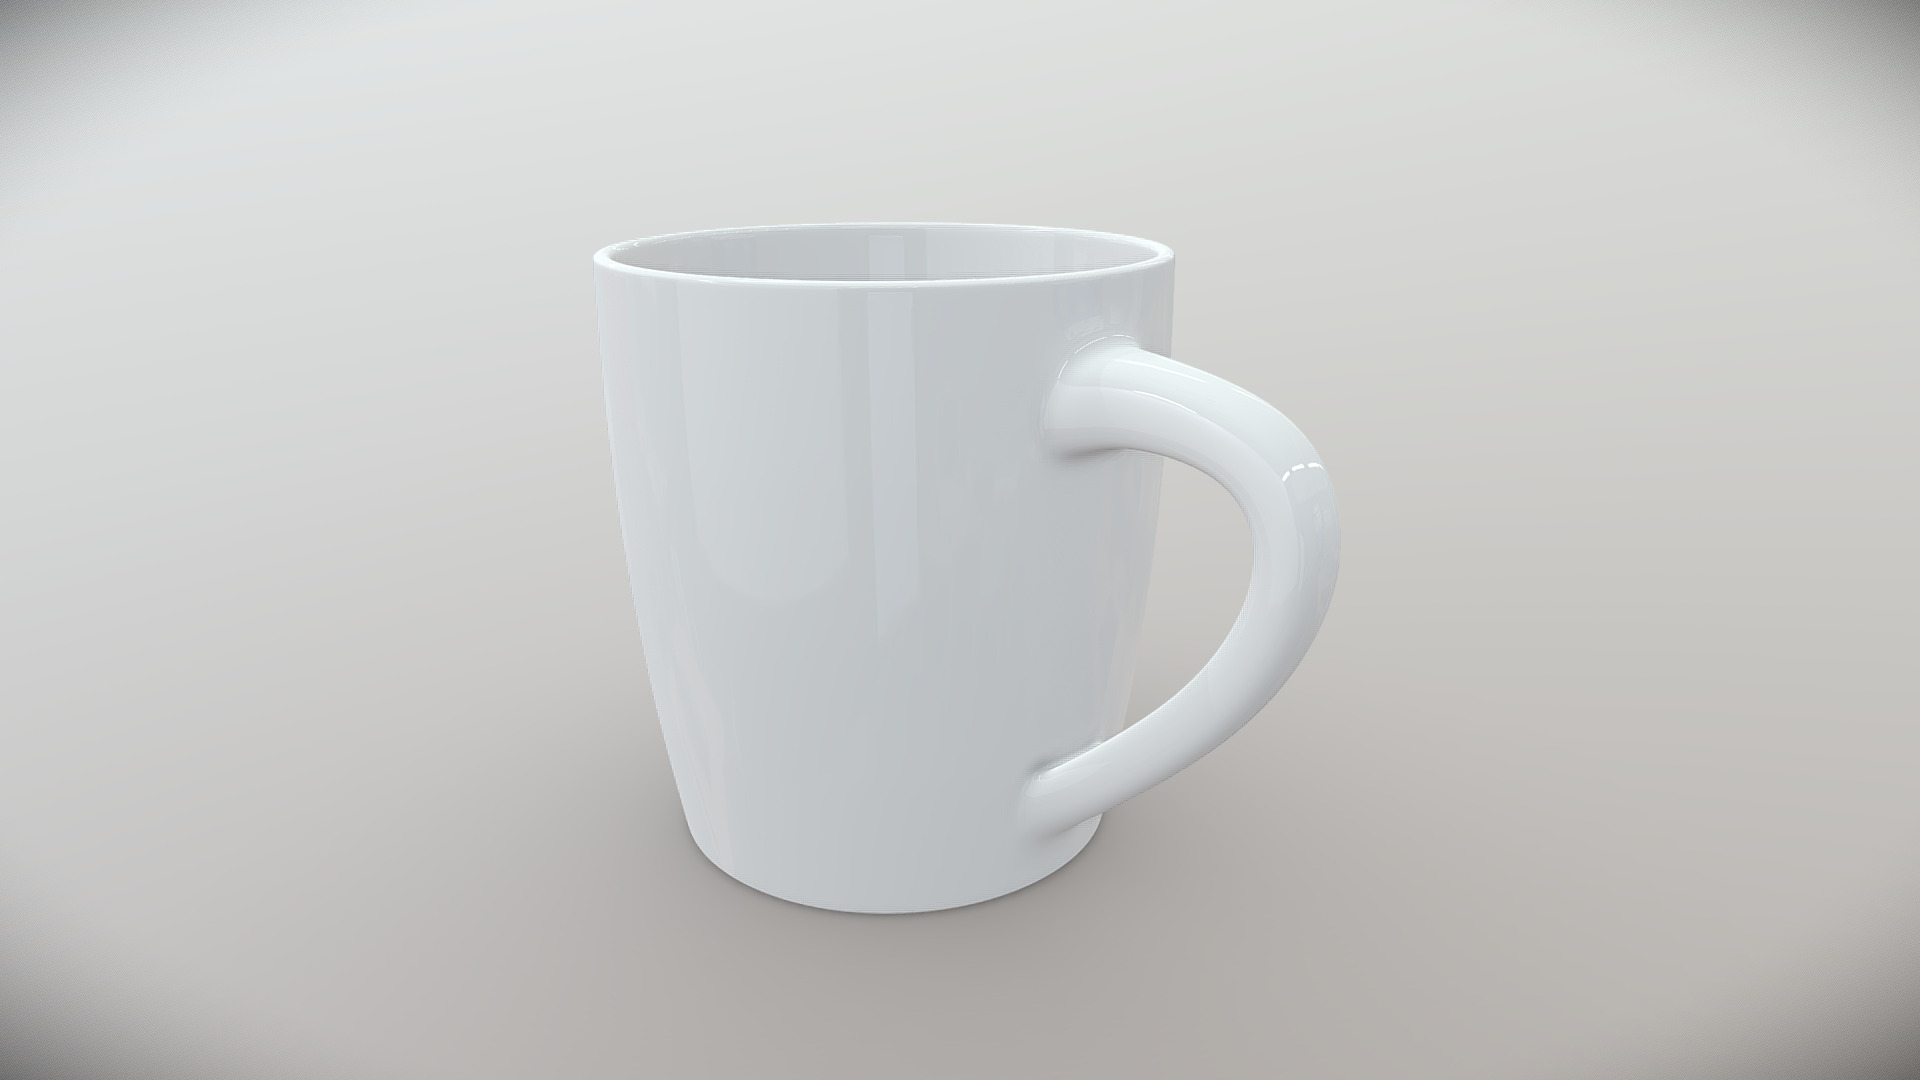 3D model MUG – CUP - This is a 3D model of the MUG - CUP. The 3D model is about a white mug with a handle.